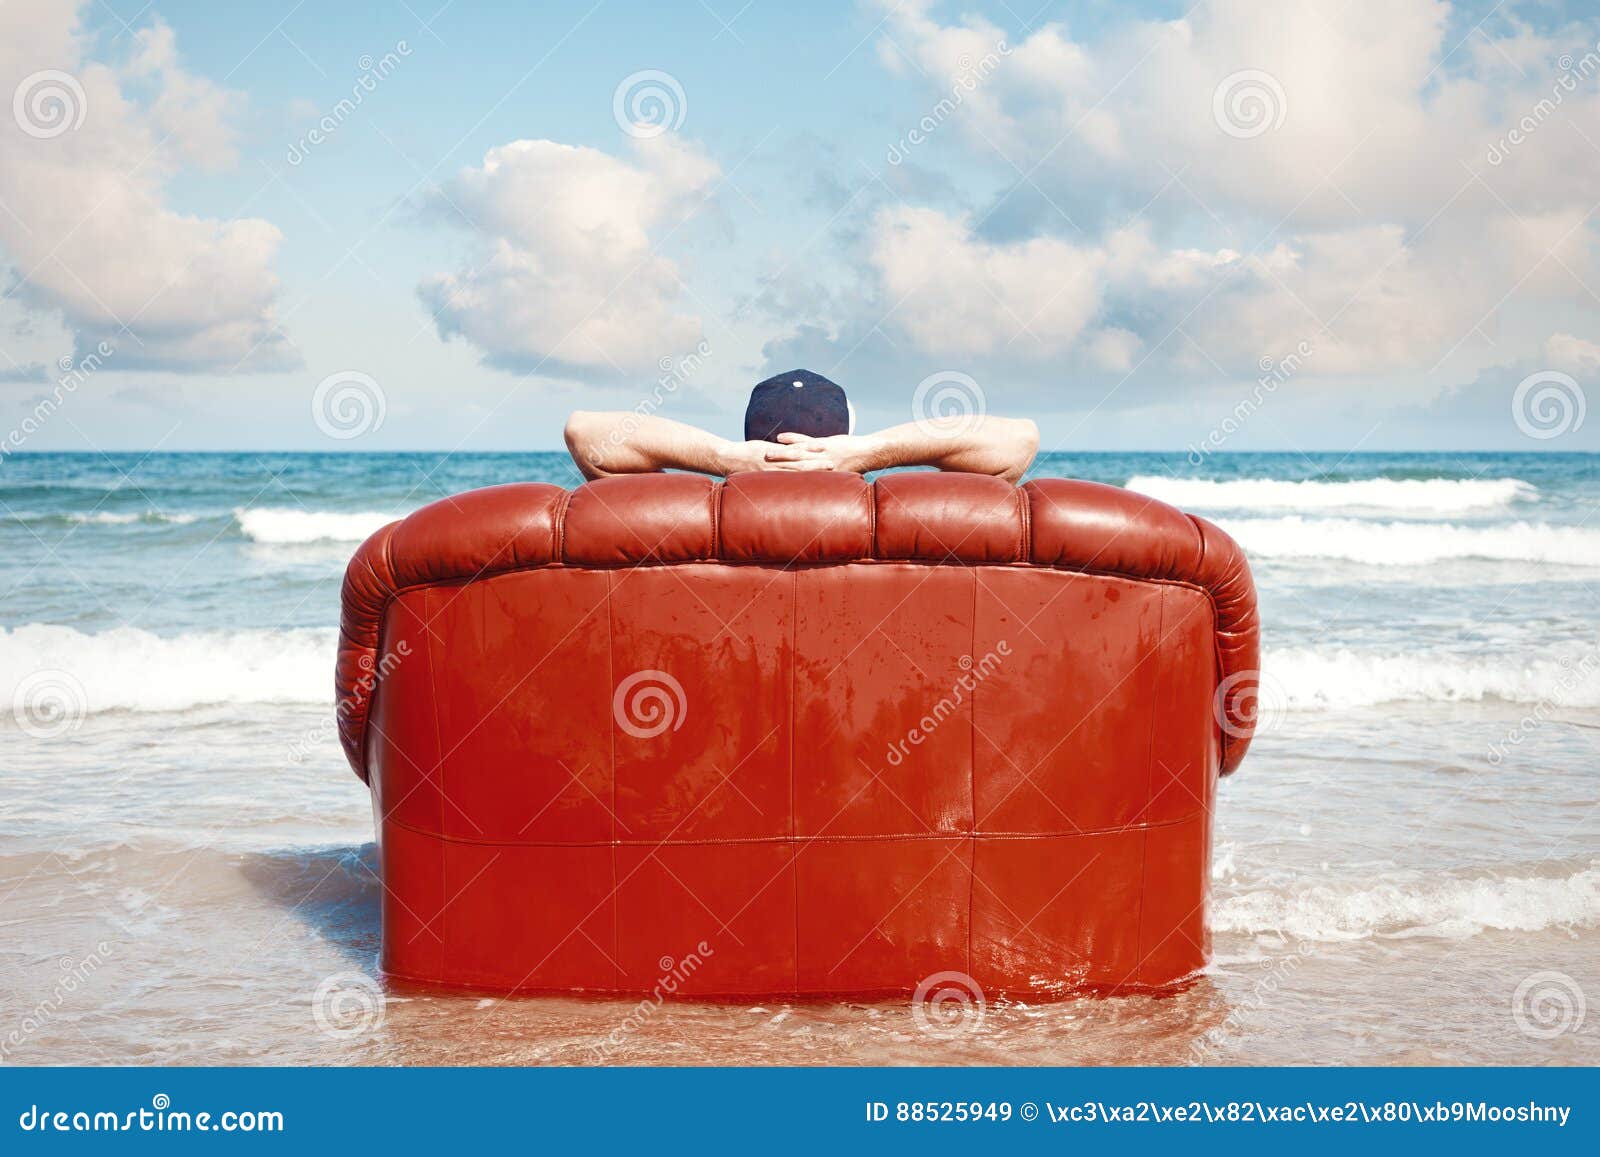 man resting in couch on the beach